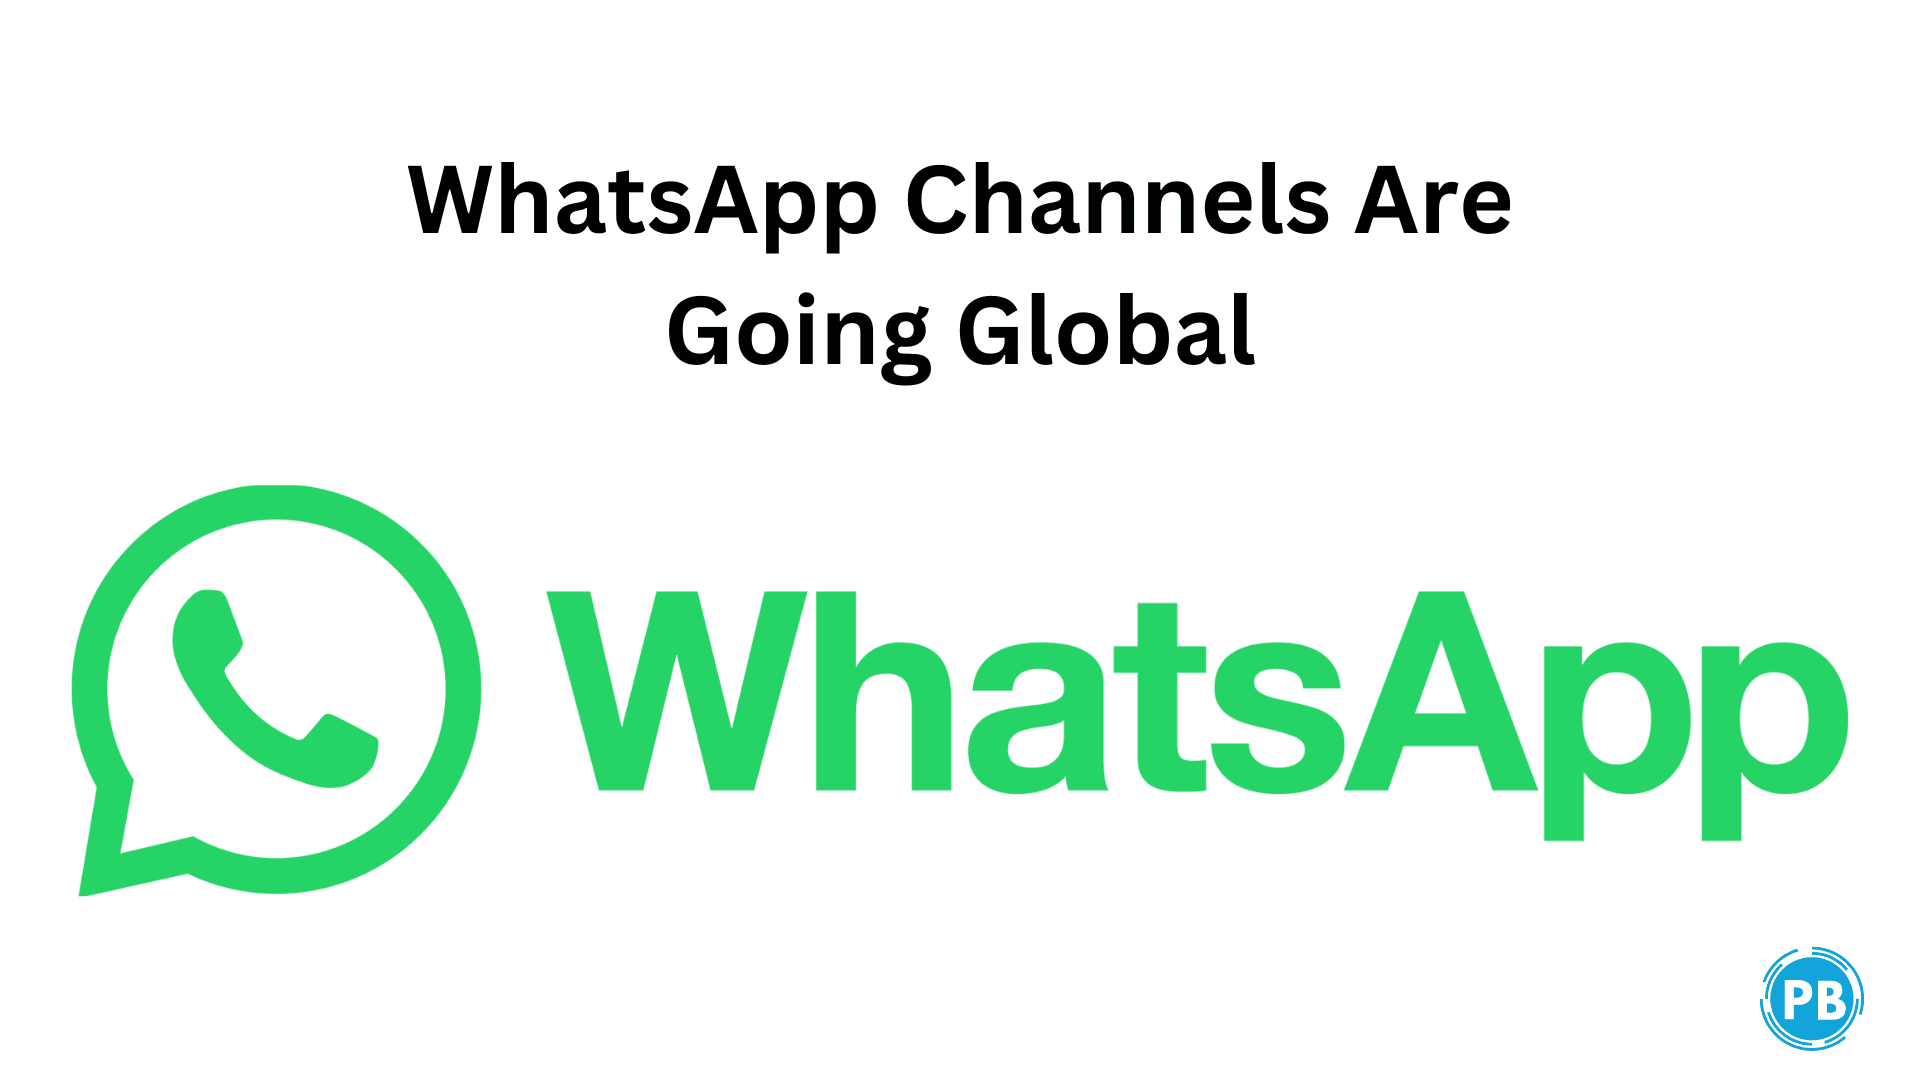 WhatsApp Channels Are Going Global